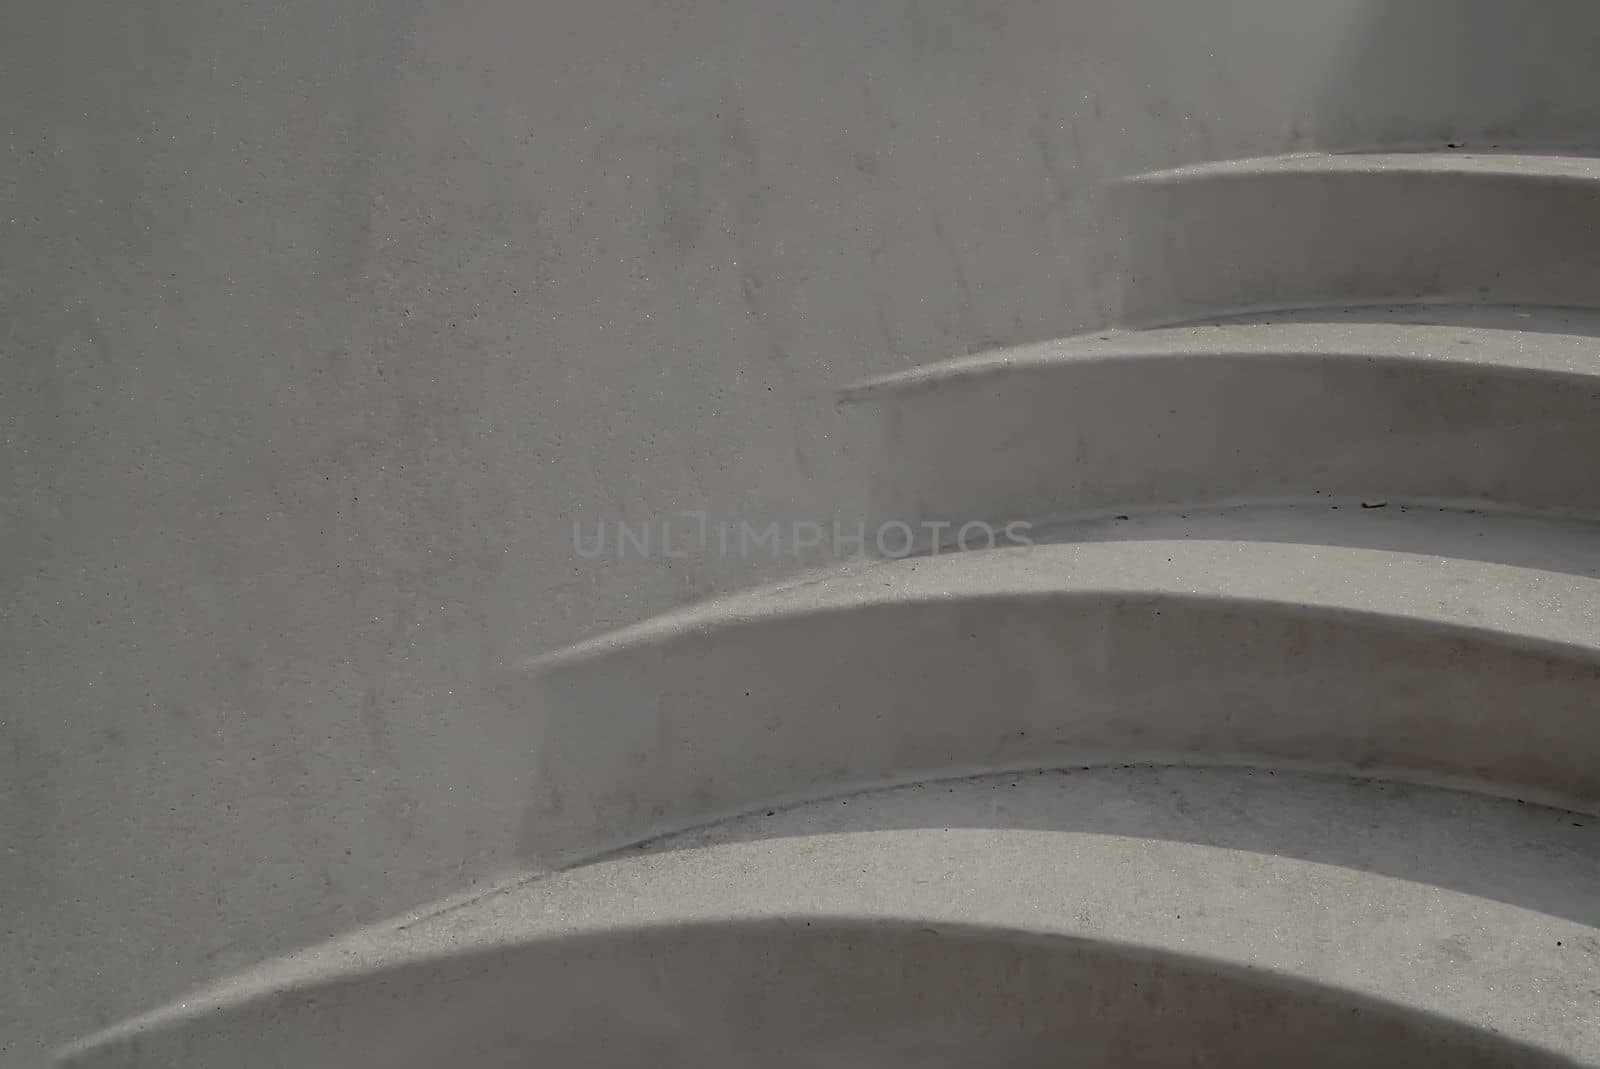 Architecture stairway design pattern often seen on monuments and landmarks, Abstract steps, Cemented stairs, Space for text, Selective Focus.